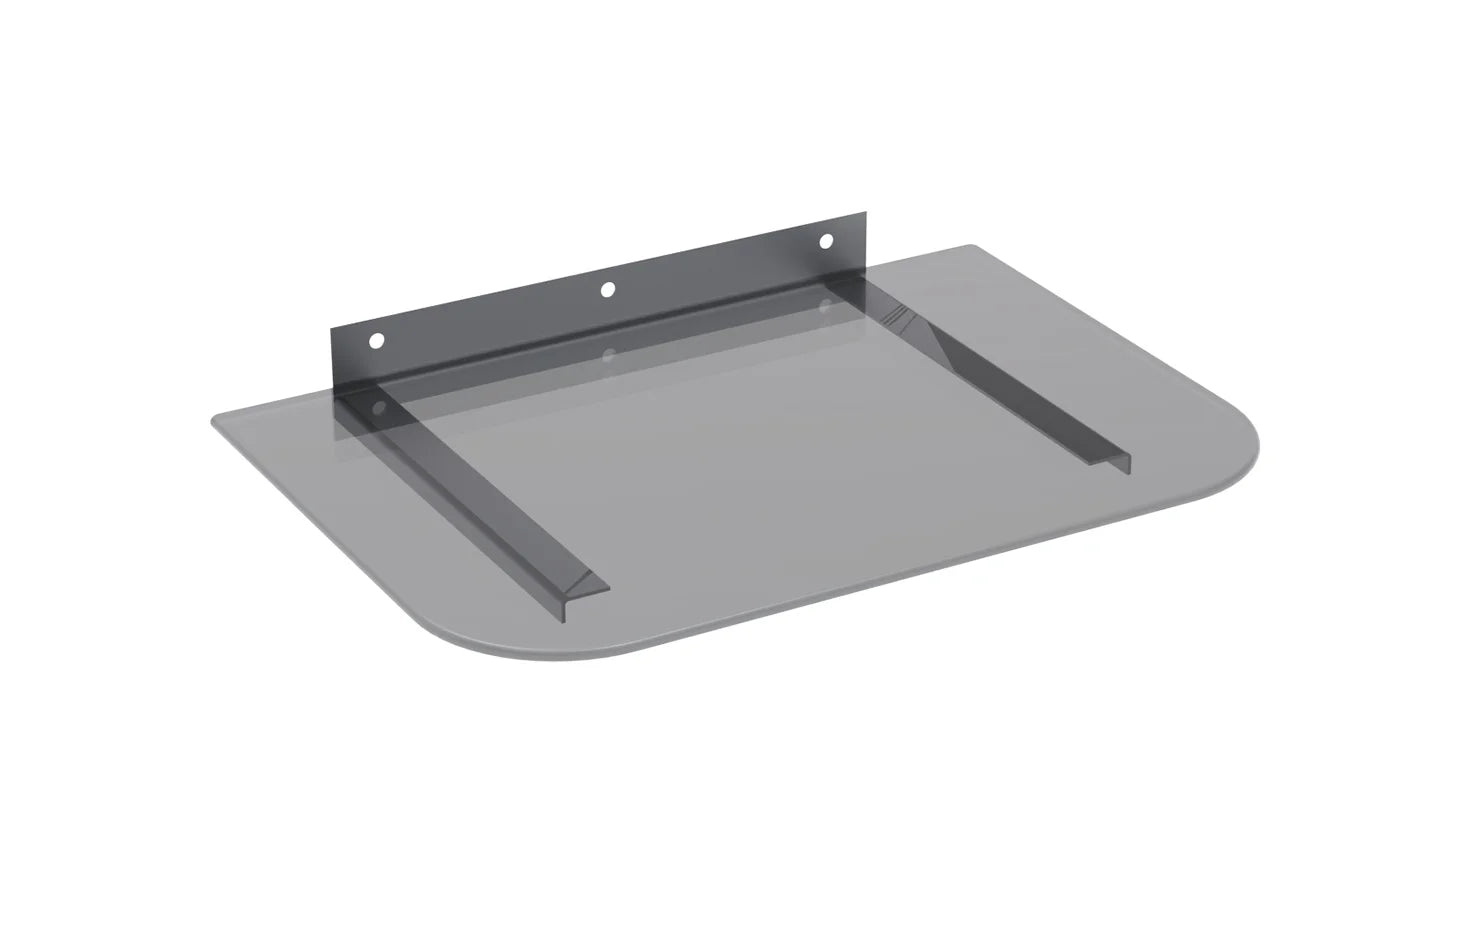 Skill Tech SH 04D - Economy Steel & Tempered Glass Wall Mount